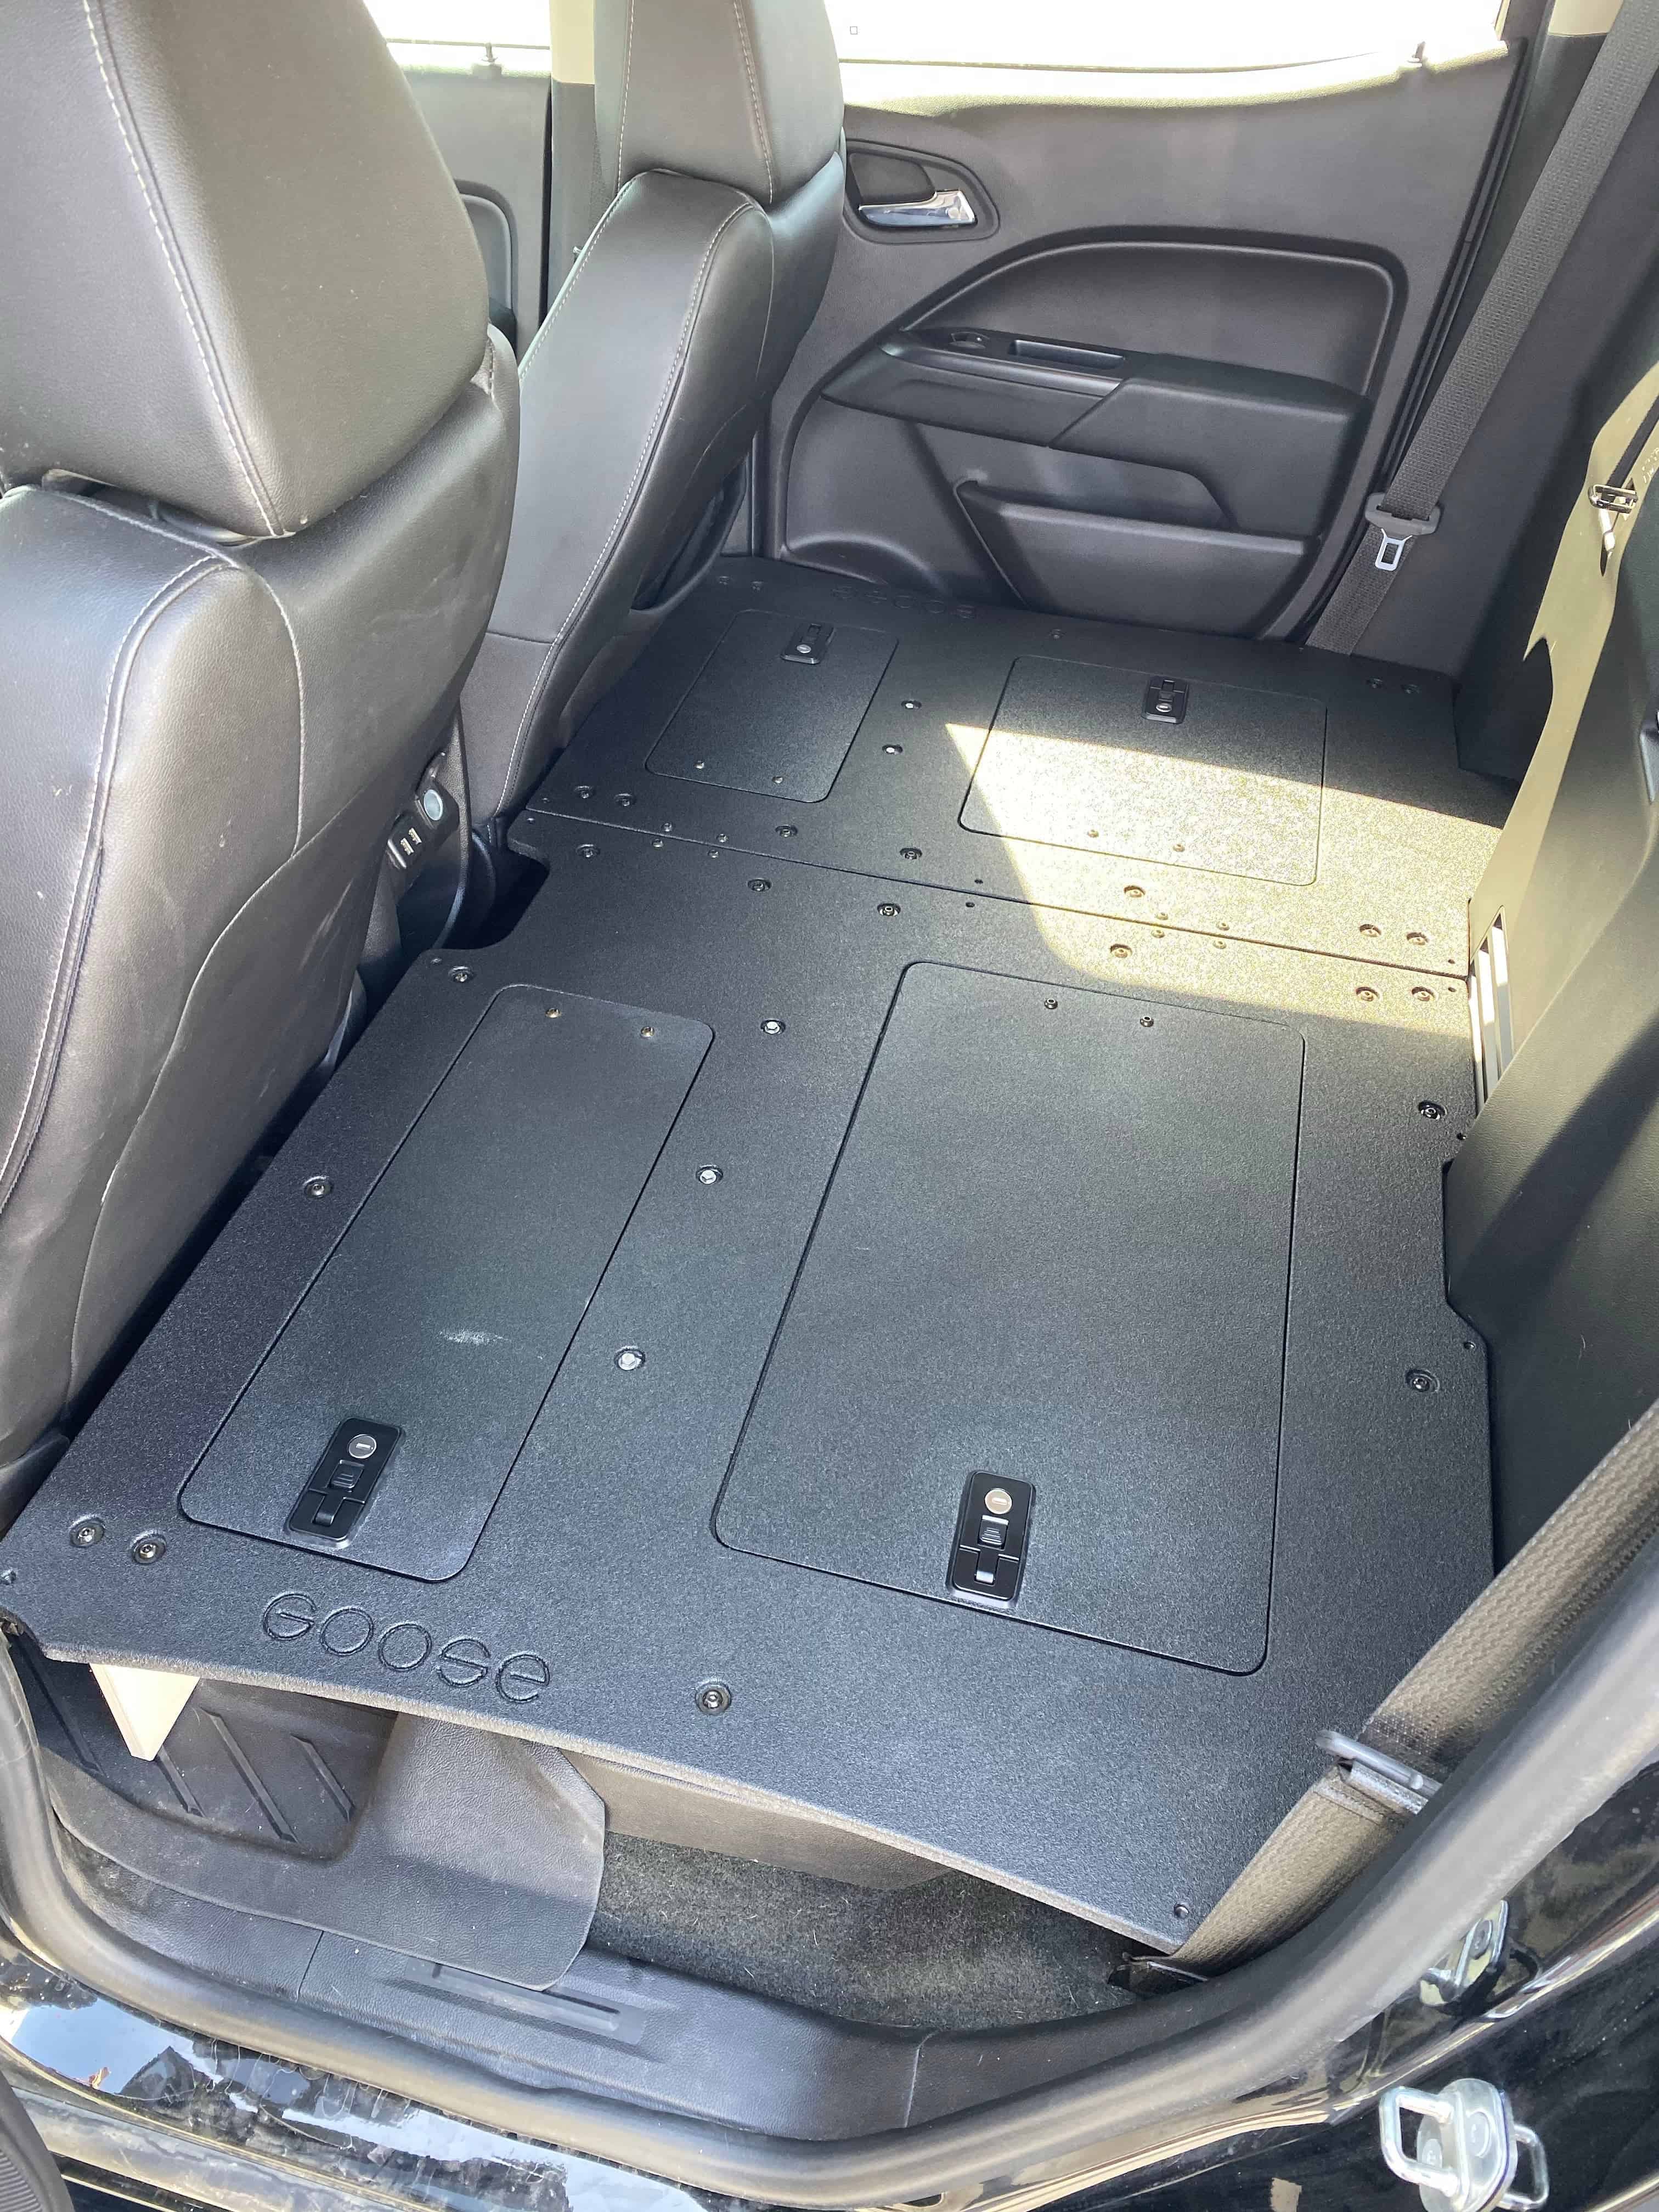 Chevy Colorado 2015-2022 2nd Gen. Crew Cab - Second Row Seat Delete Plate System